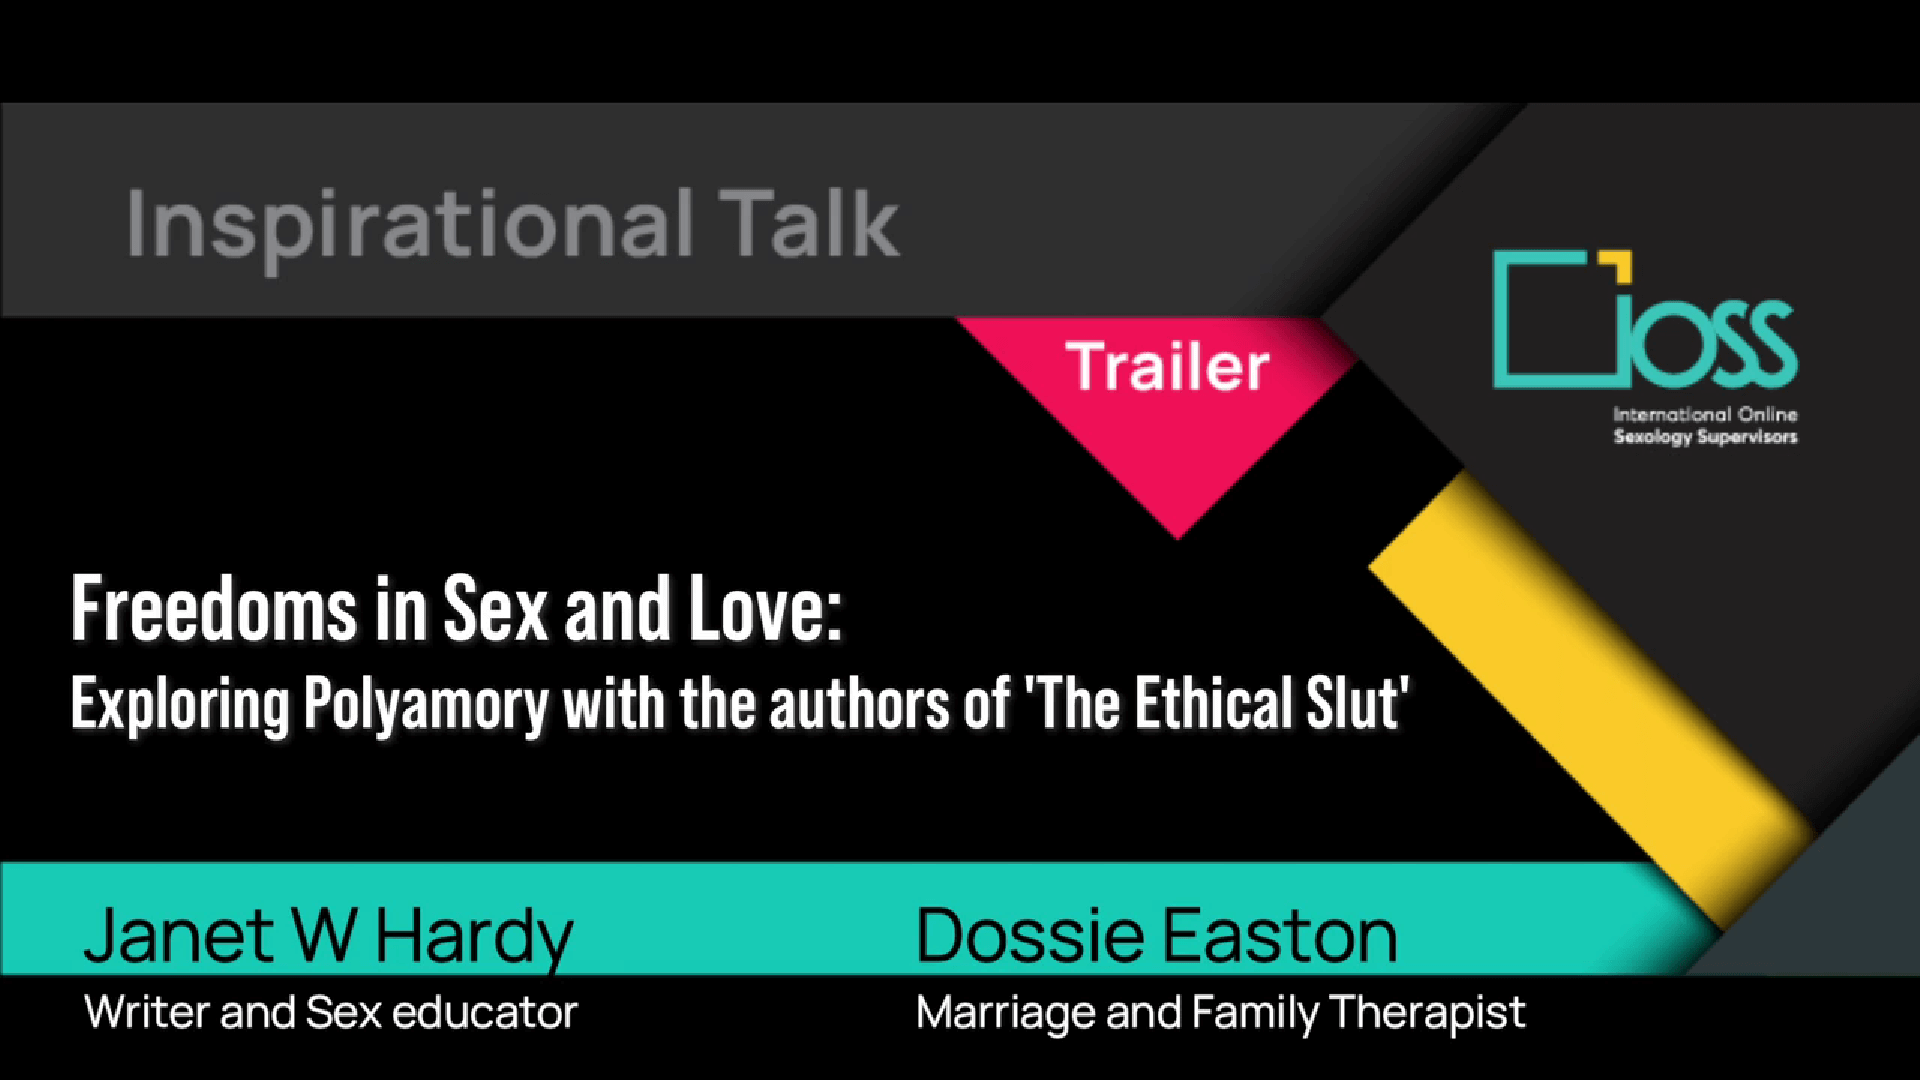 Trailer Freedoms in Sex and Love. Exploring Polyamory with the authors of “The ethical slut”